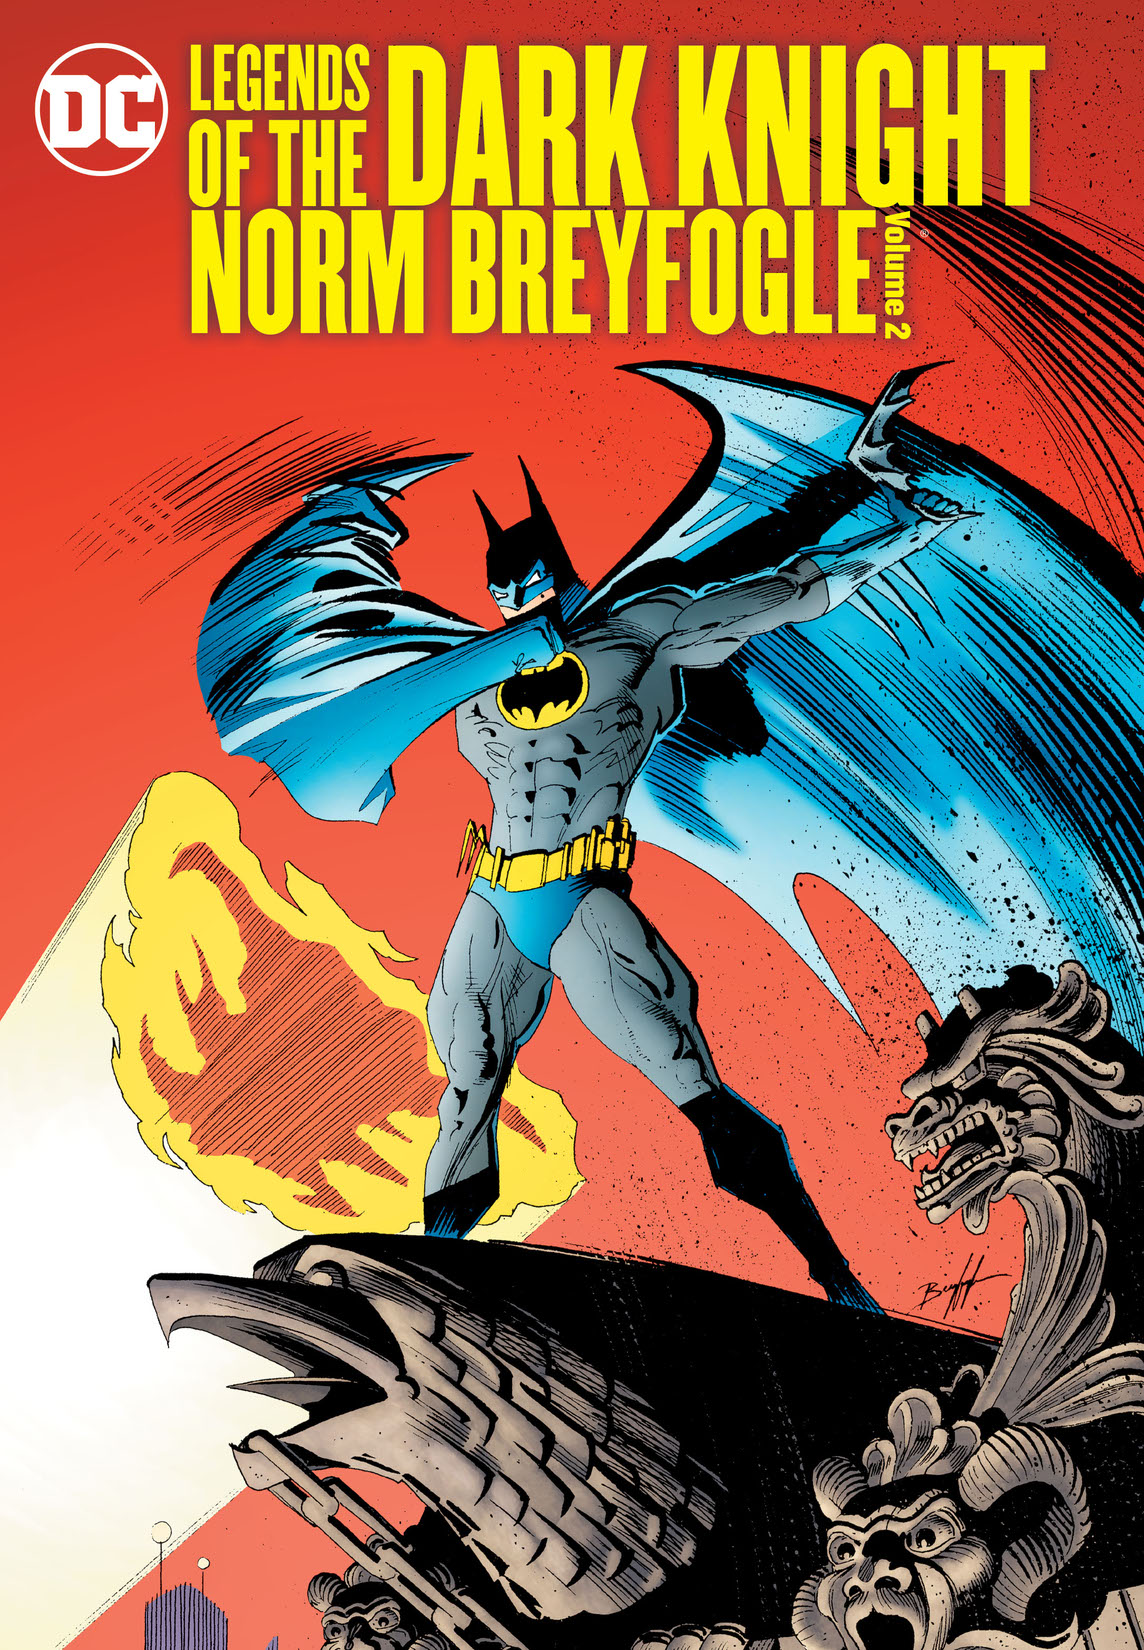 Legends of the Dark Knight: Norm Breyfogle Vol. 2 preview images